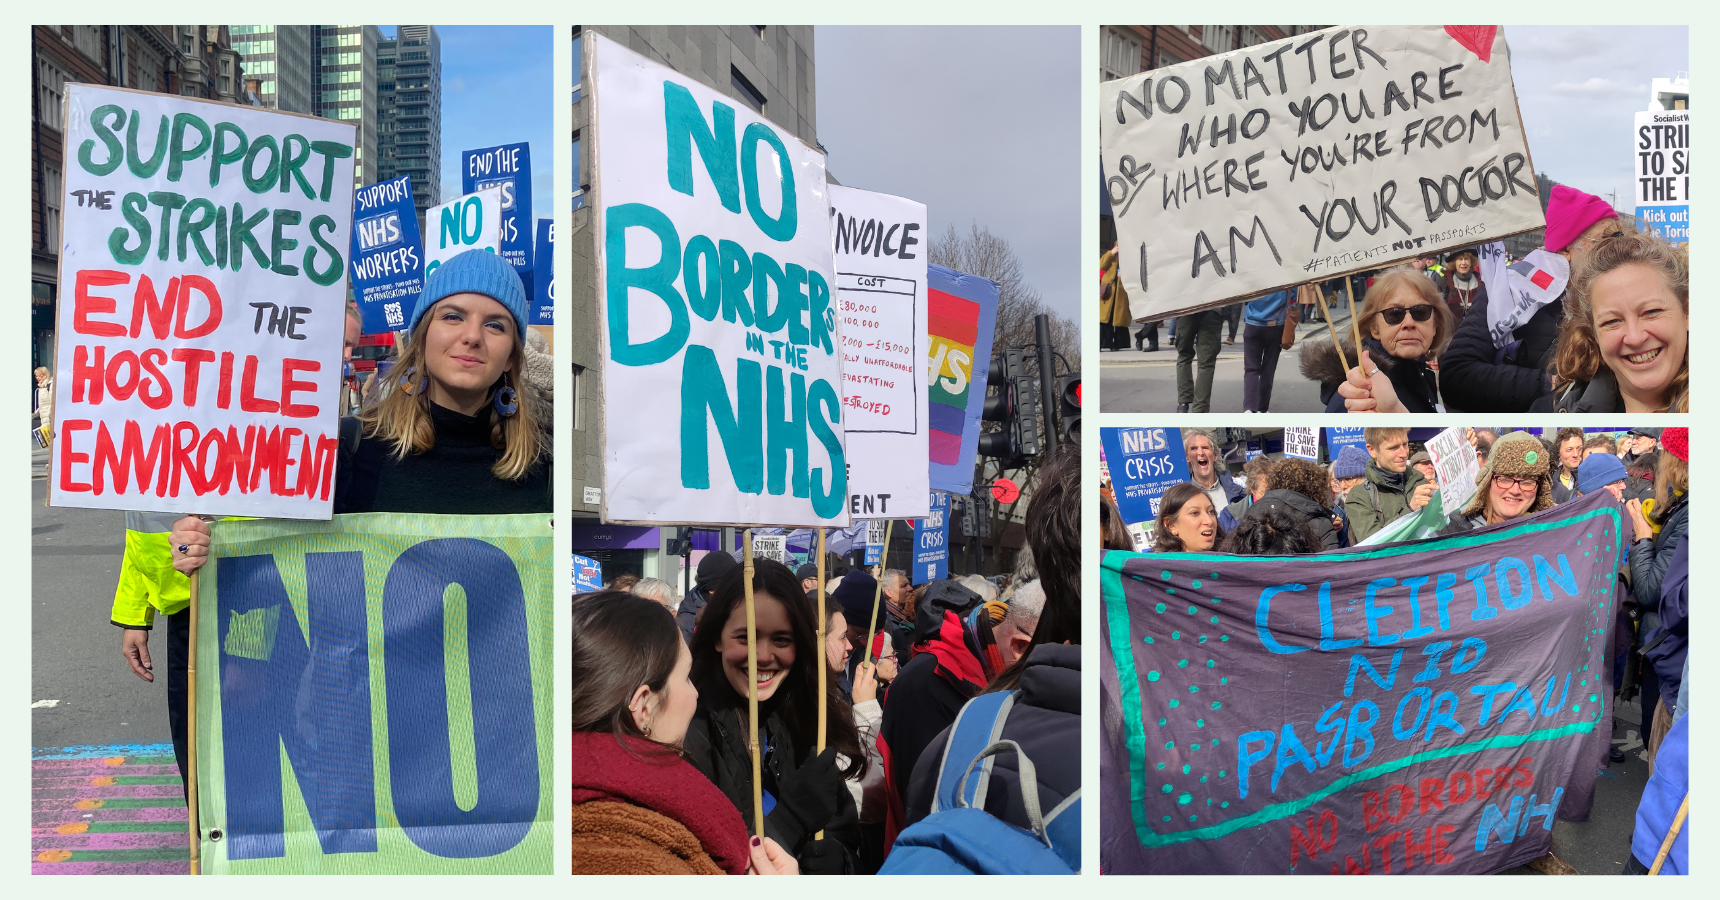 A collage of pictures of Patients Not Passports campaigners on marches holding placards including "Support the strikes – end the hostile environment" & "No borders in the NHS"